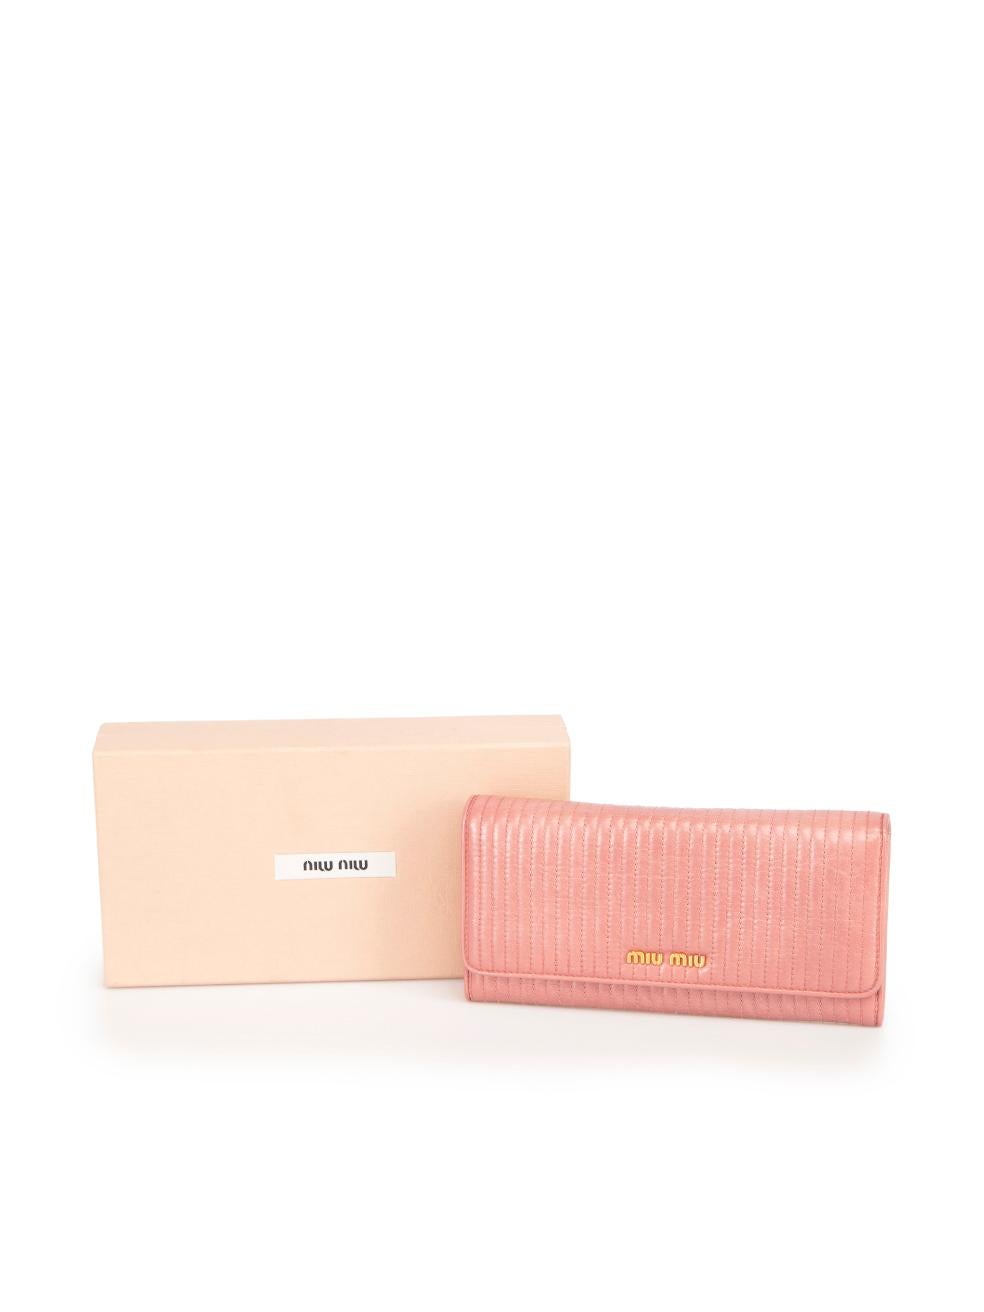 Miu Miu Pink Leather Quilted Continental Wallet For Sale 3